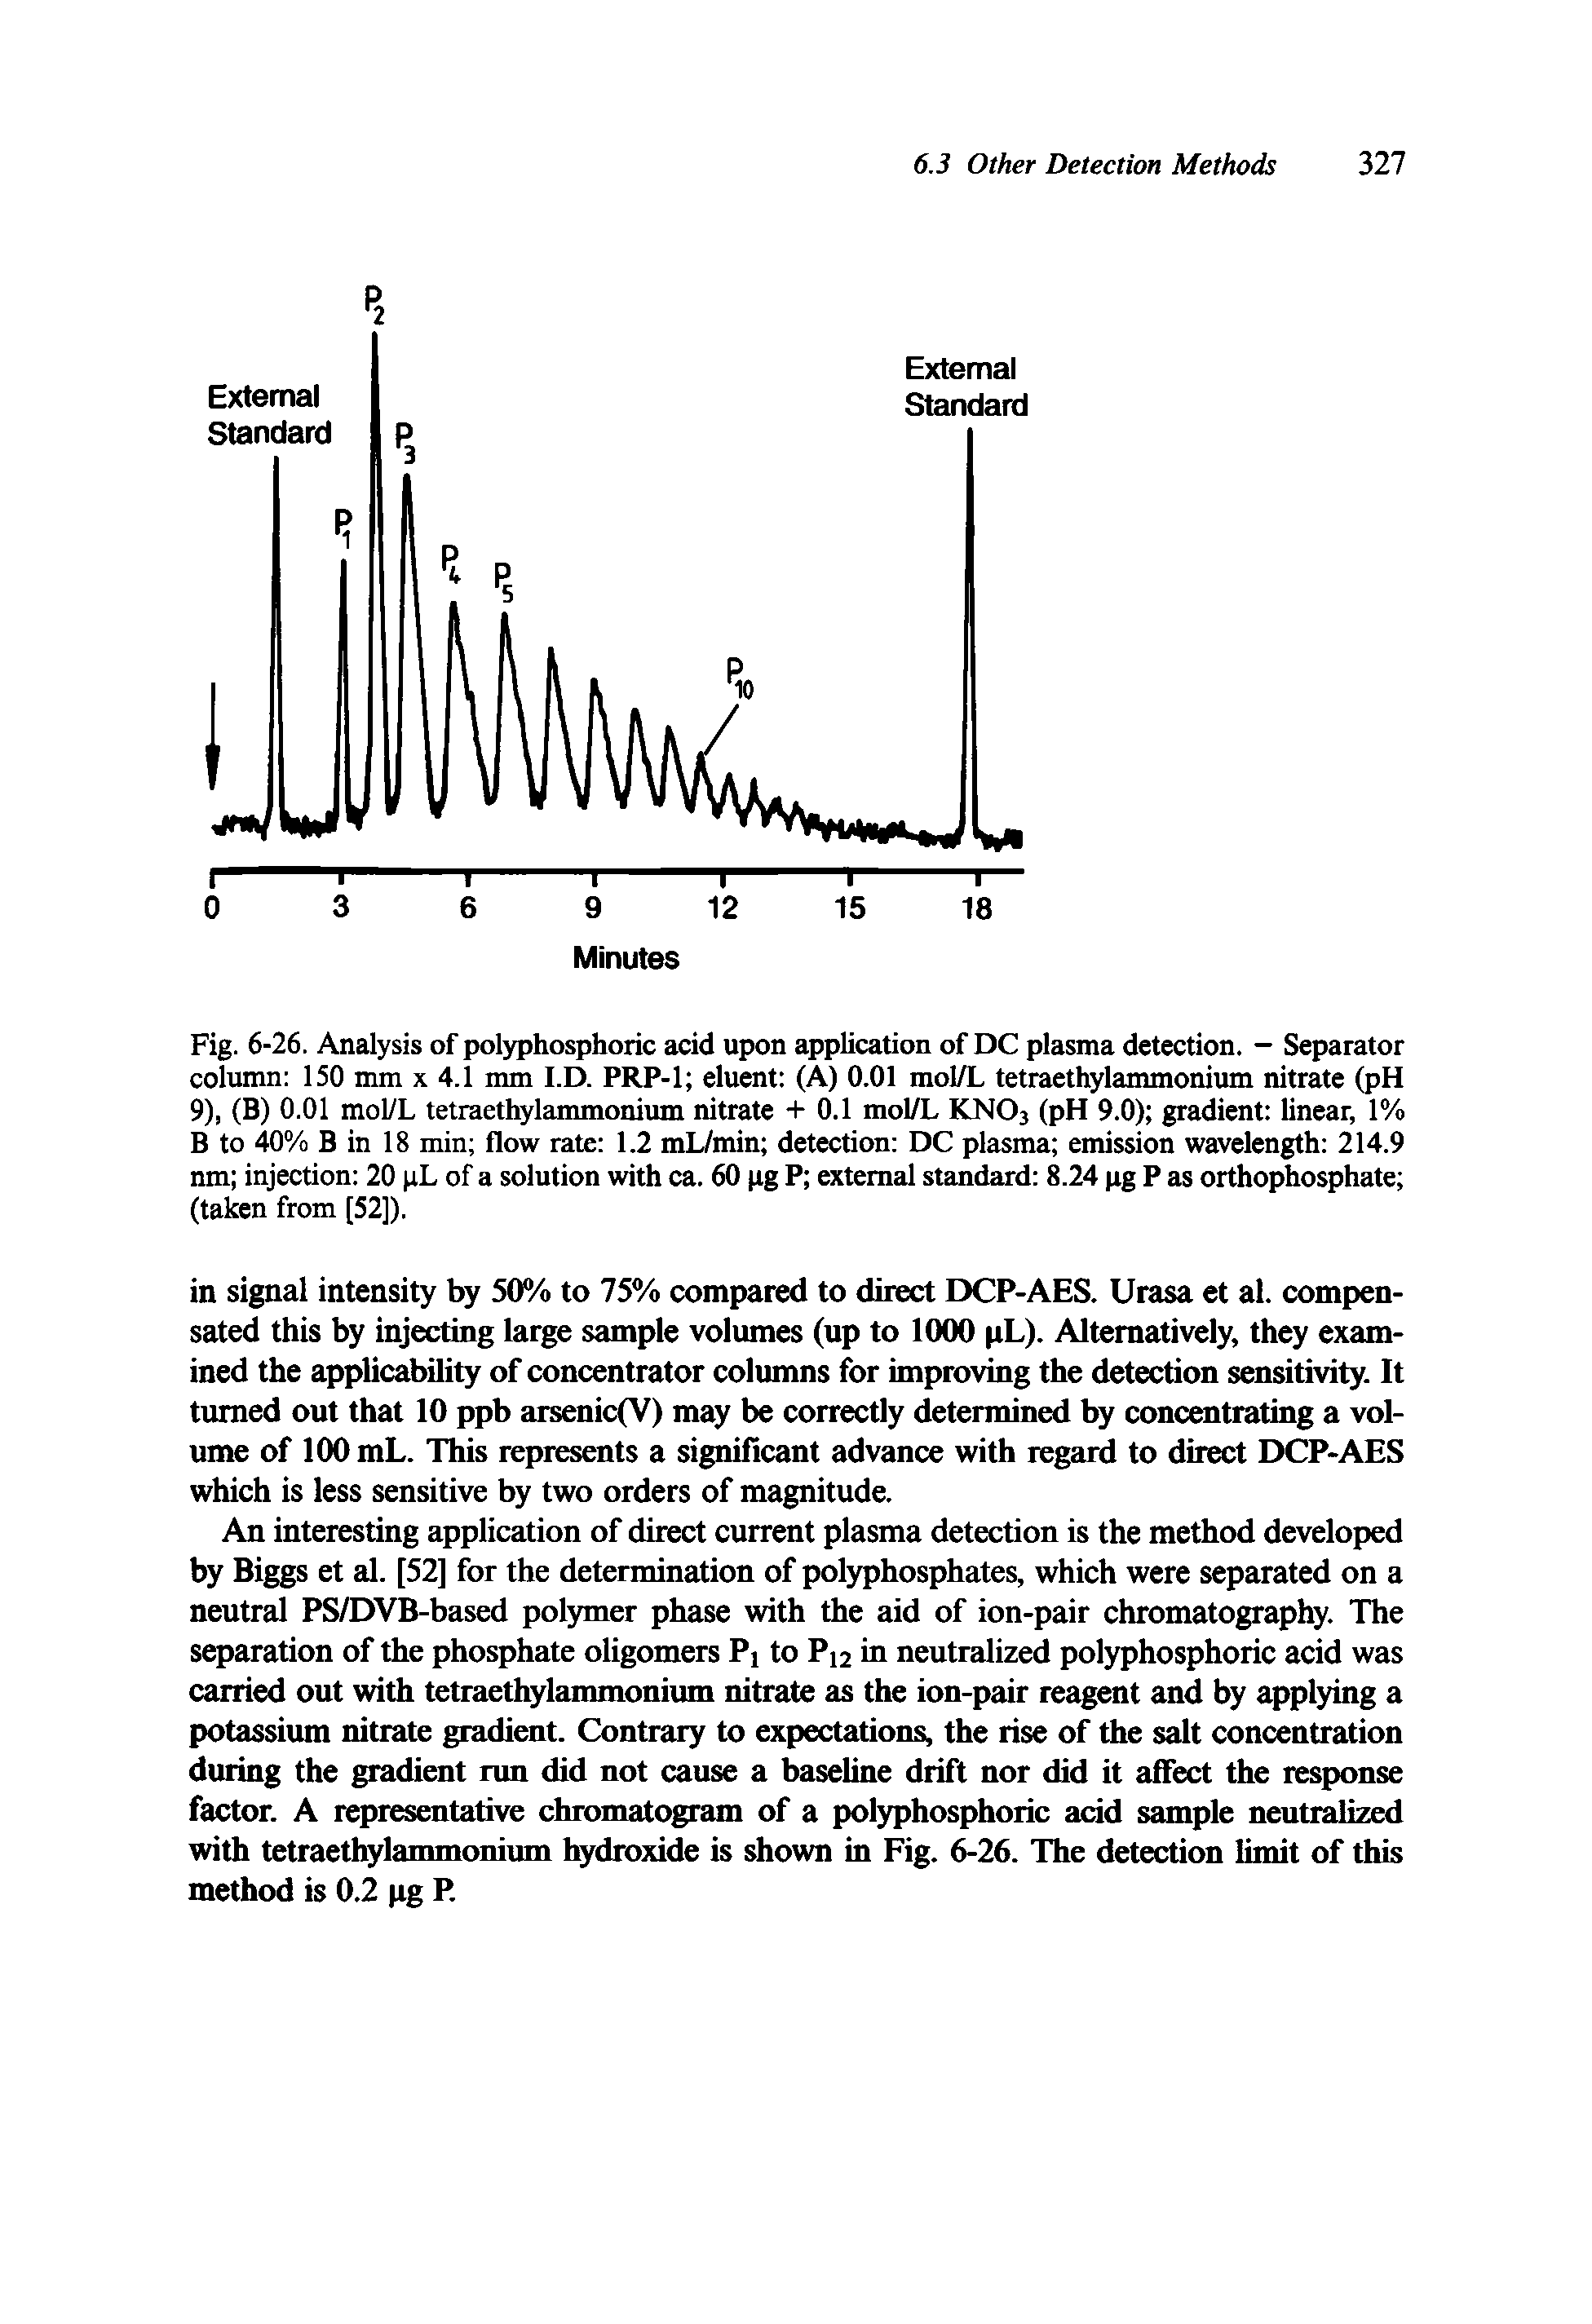 Fig. 6-26. Analysis of polyphosphoric acid upon application of DC plasma detection. - Separator column 150 mm x 4.1 mm I.D. PRP-1 eluent (A) 0.01 mol/L tetraethylammonium nitrate (pH 9), (B) 0.01 mol/L tetraethylammonium nitrate + 0.1 mol/L KN03 (pH 9.0) gradient linear, 1% B to 40% B in 18 min flow rate 1.2 mL/min detection DC plasma emission wavelength 214.9 nm injection 20 pL of a solution with ca. 60 pg P external standard 8.24 pg P as orthophosphate (taken from [52]).